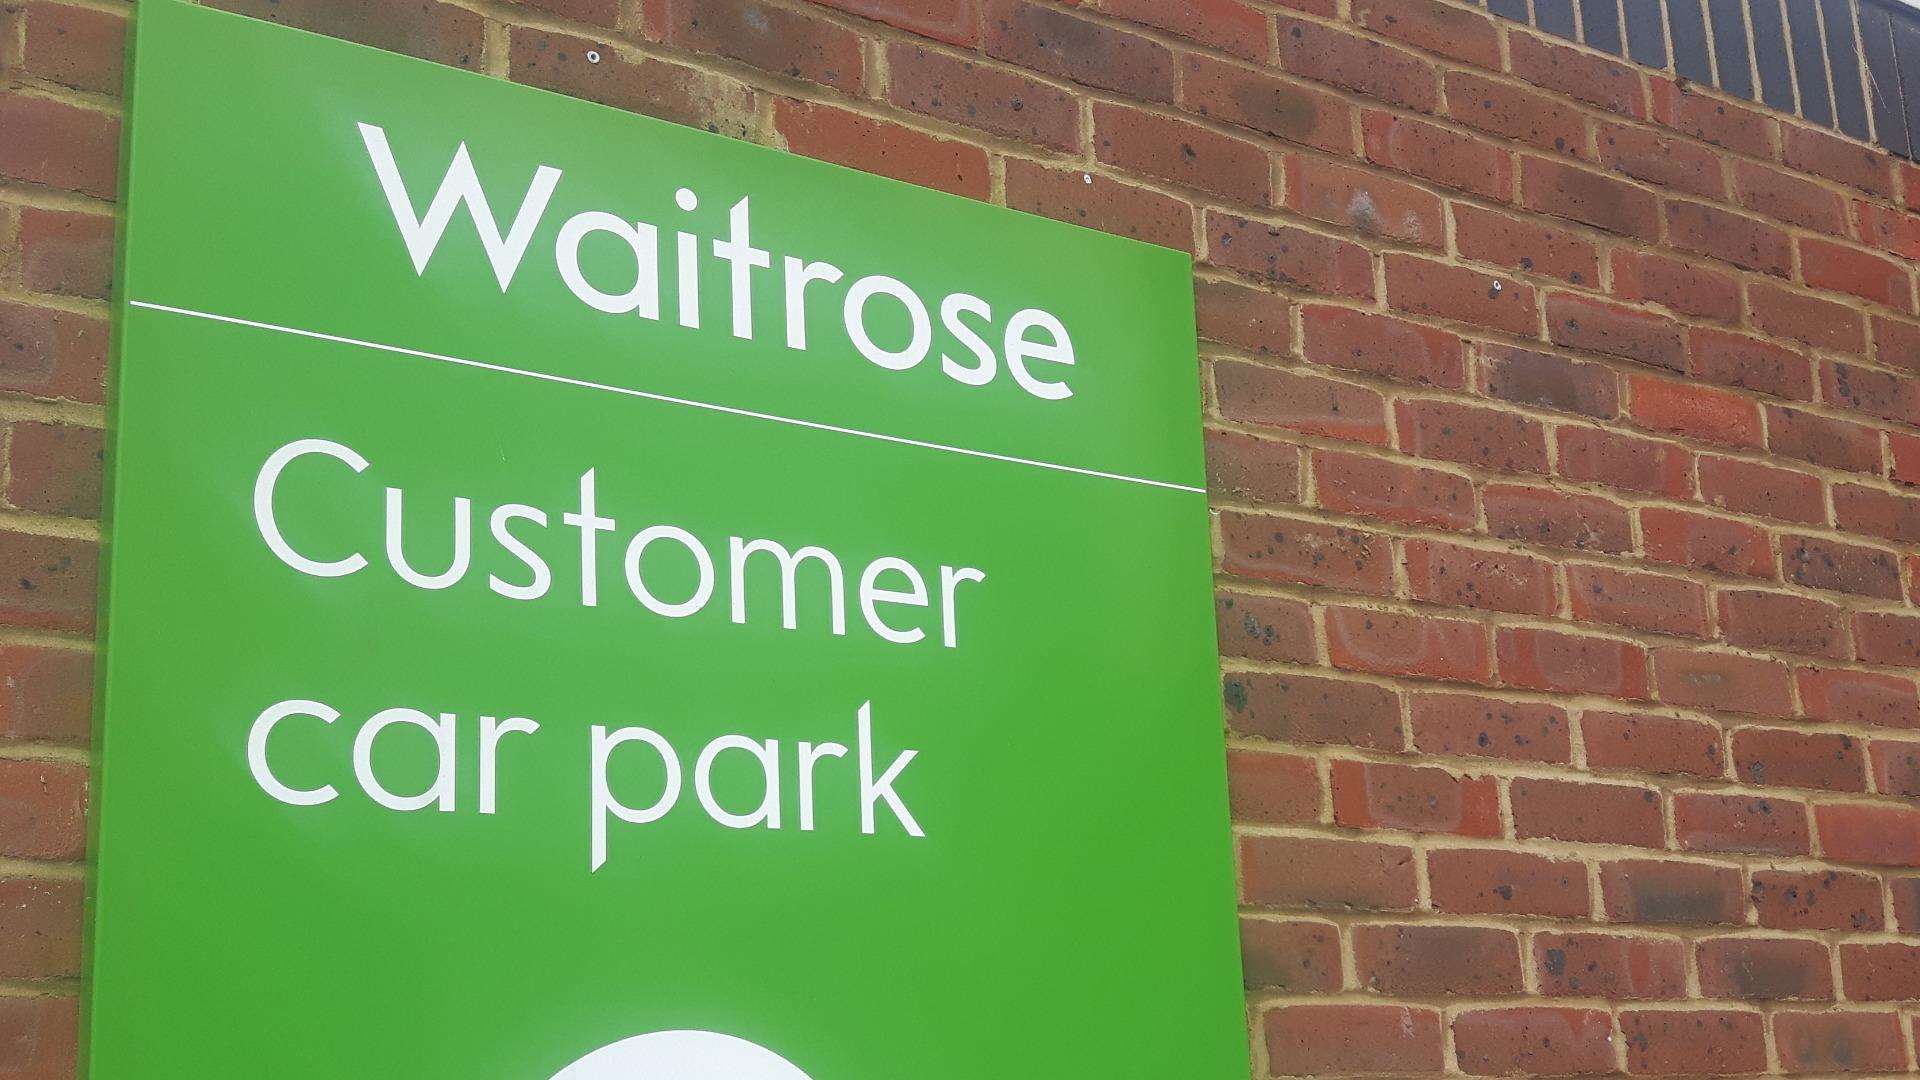 Waitrose has stores across county including Canterbury, Maidstone, Ramsgate, Tenterden and Hythe